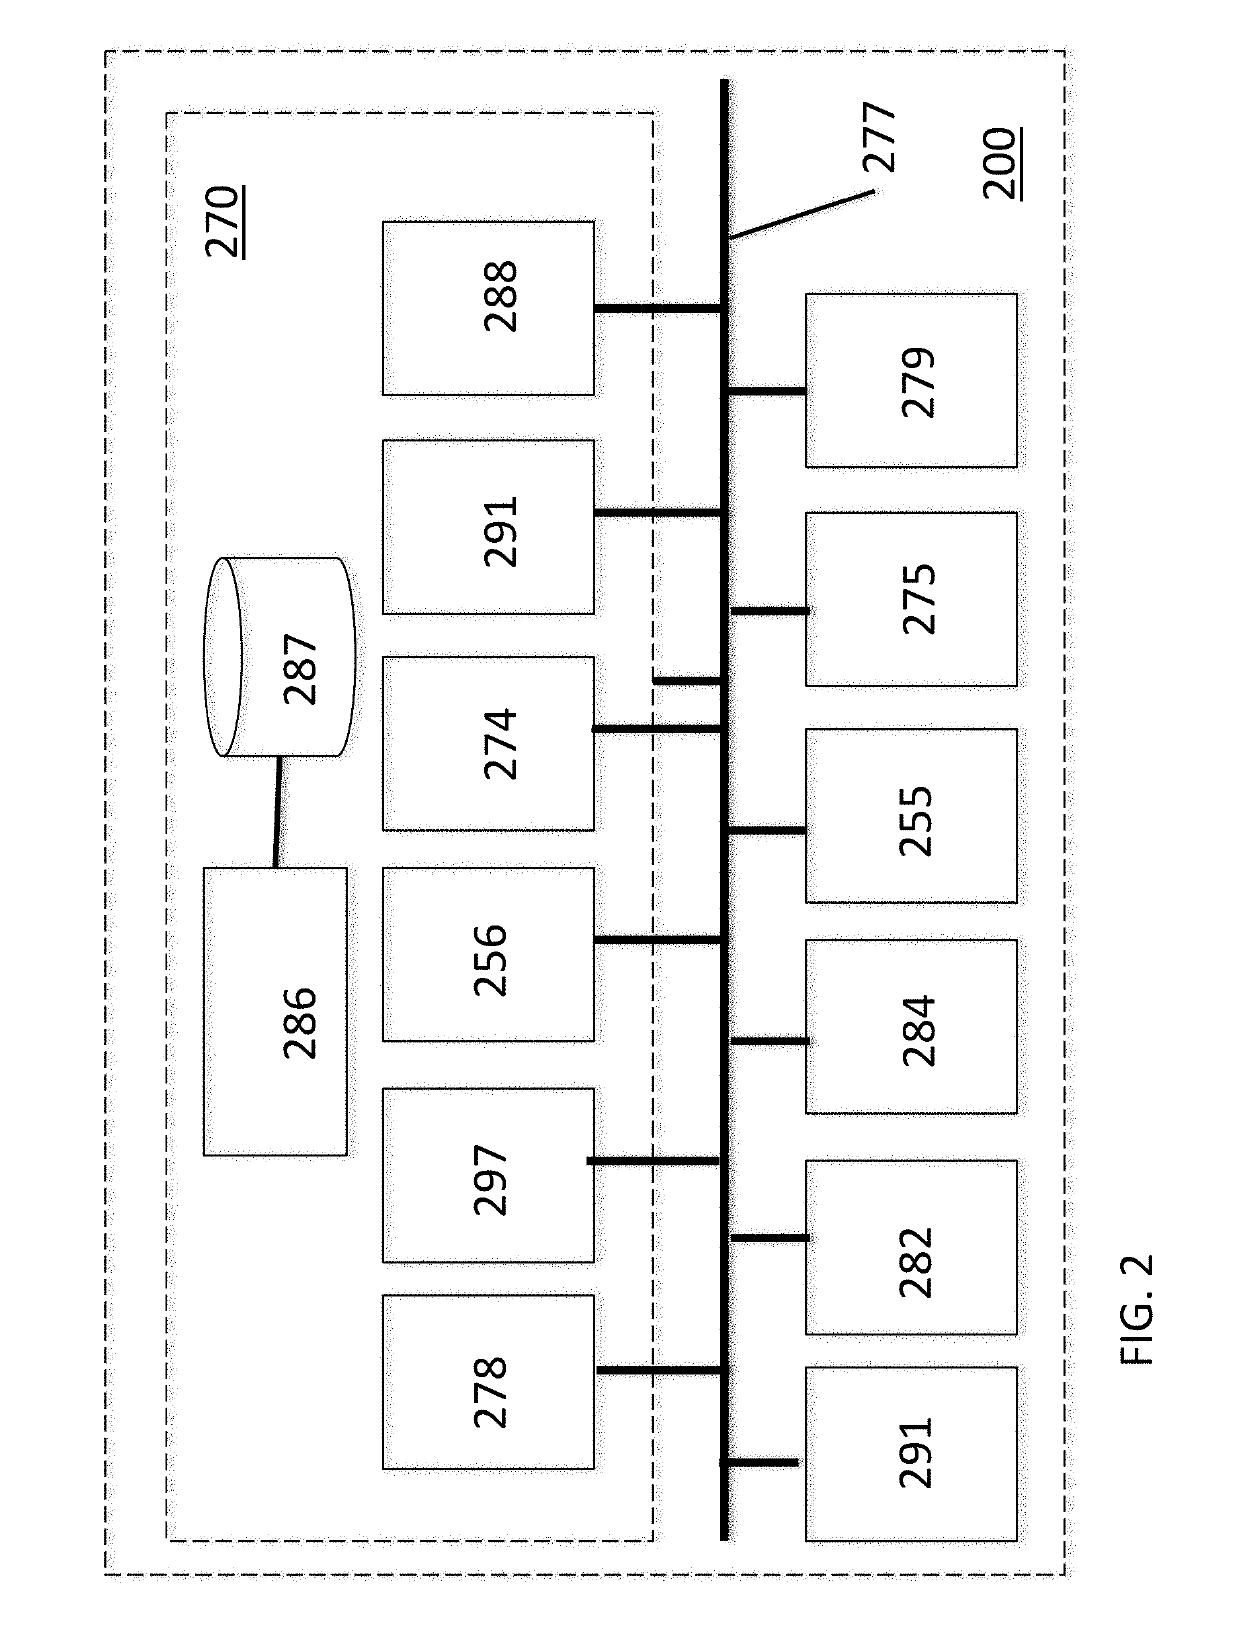 System, apparatus and method for secure deliveries of items to a residence with control of delivery authorizations and storage temperatures, and communications with delivery services